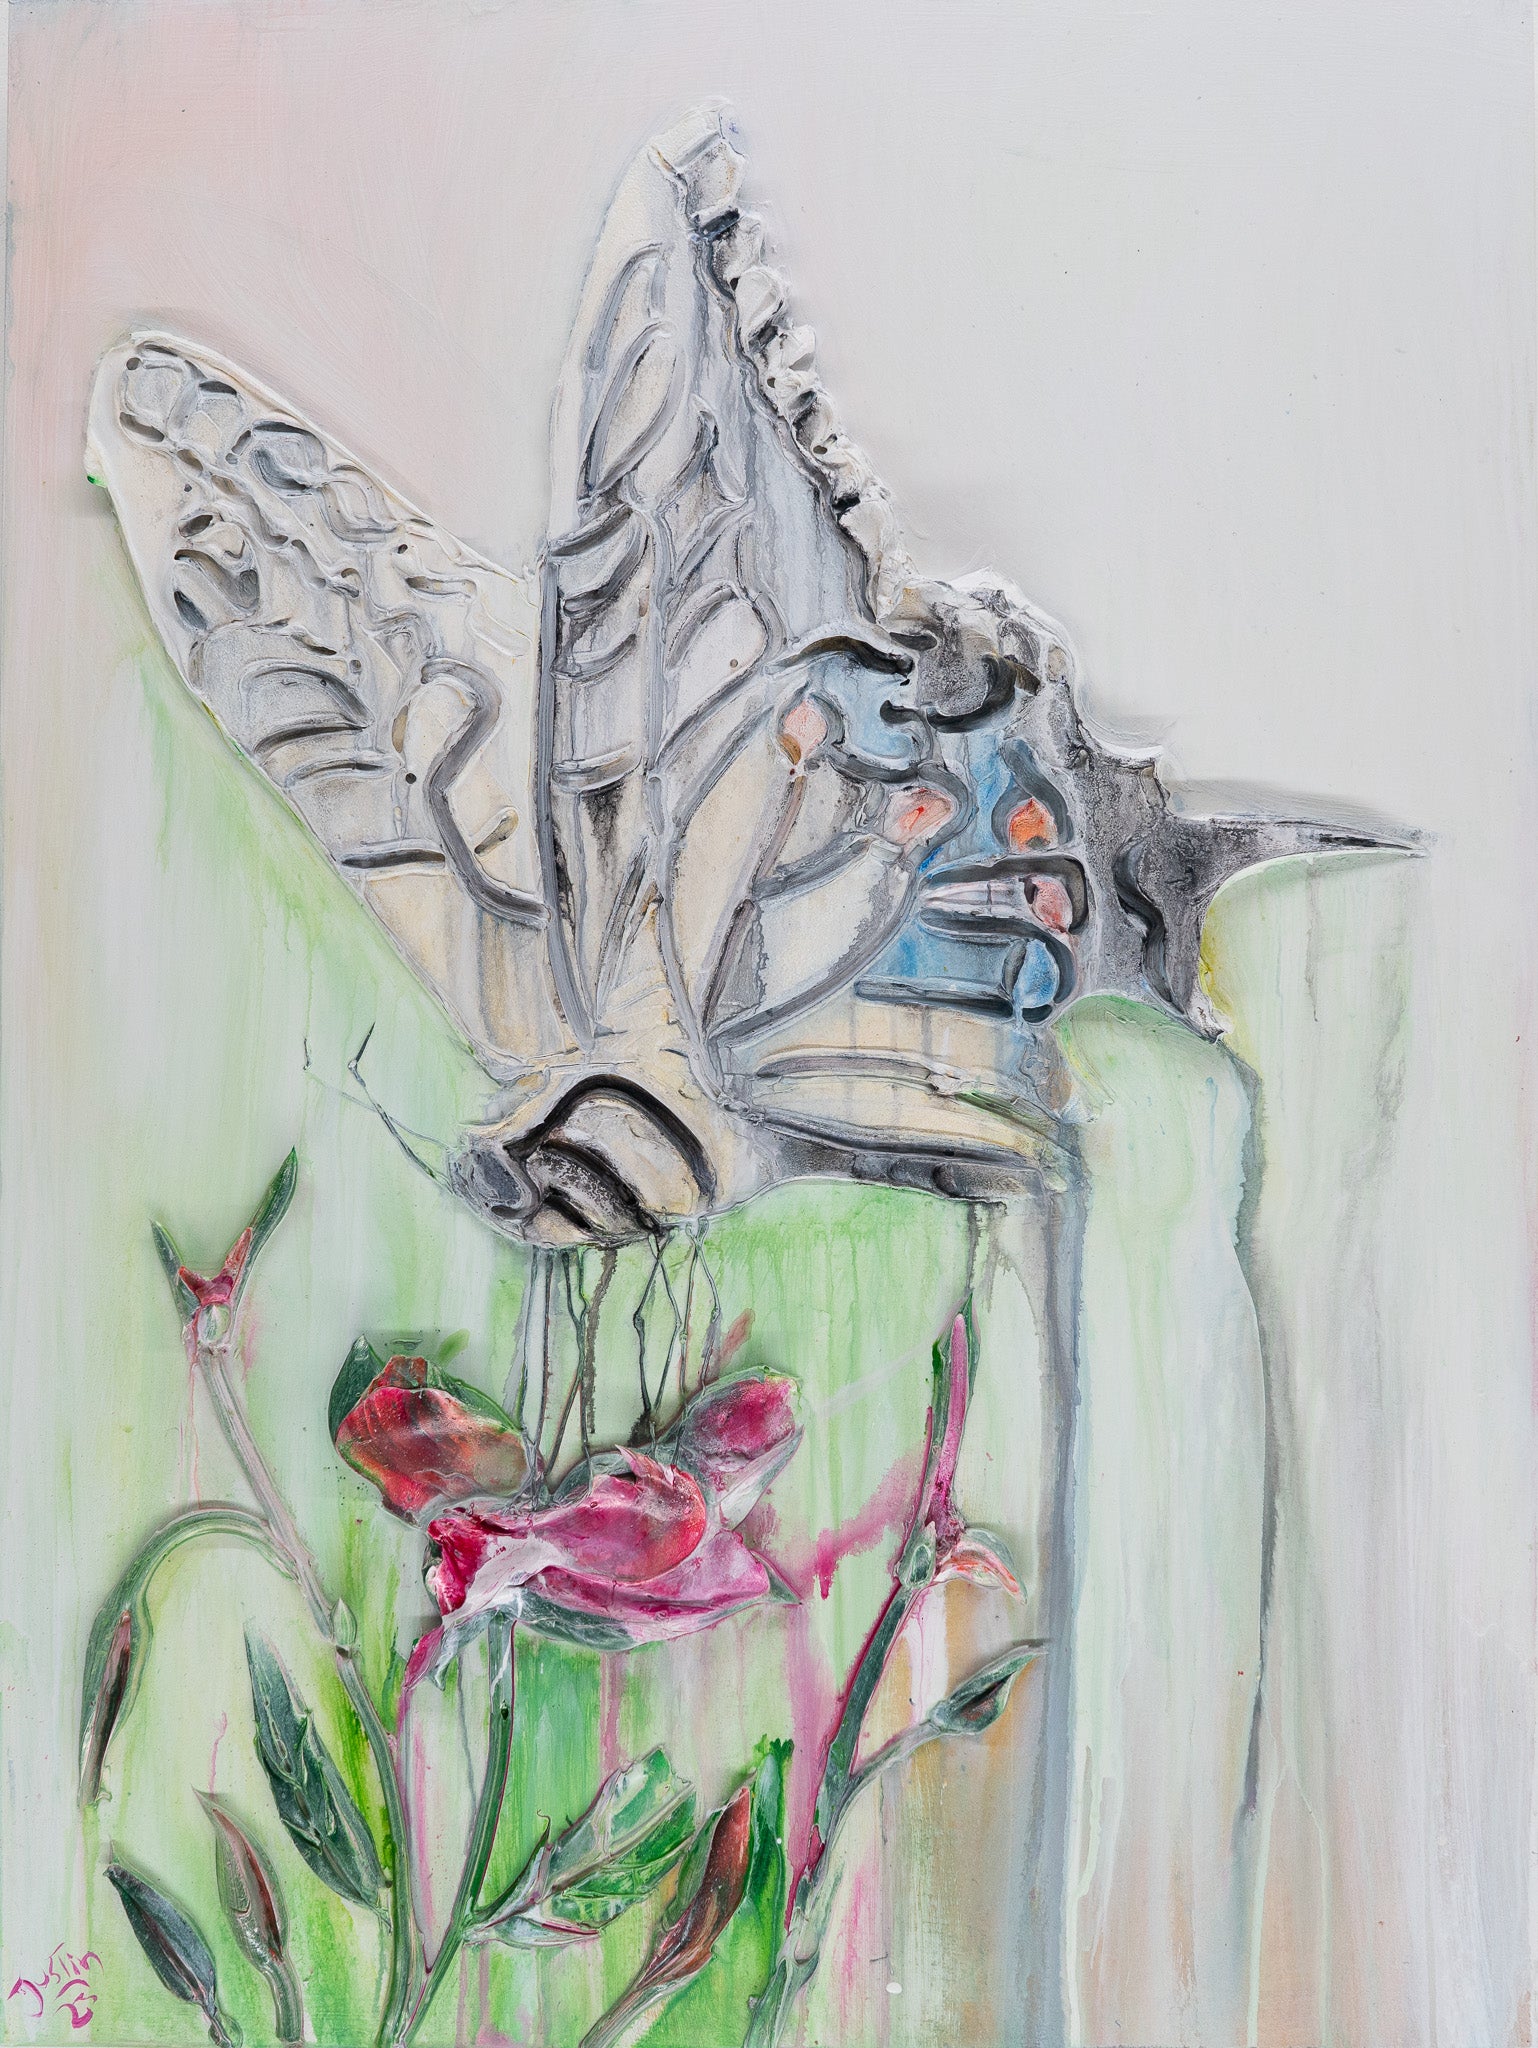 Snacking Butterfly, 30x40